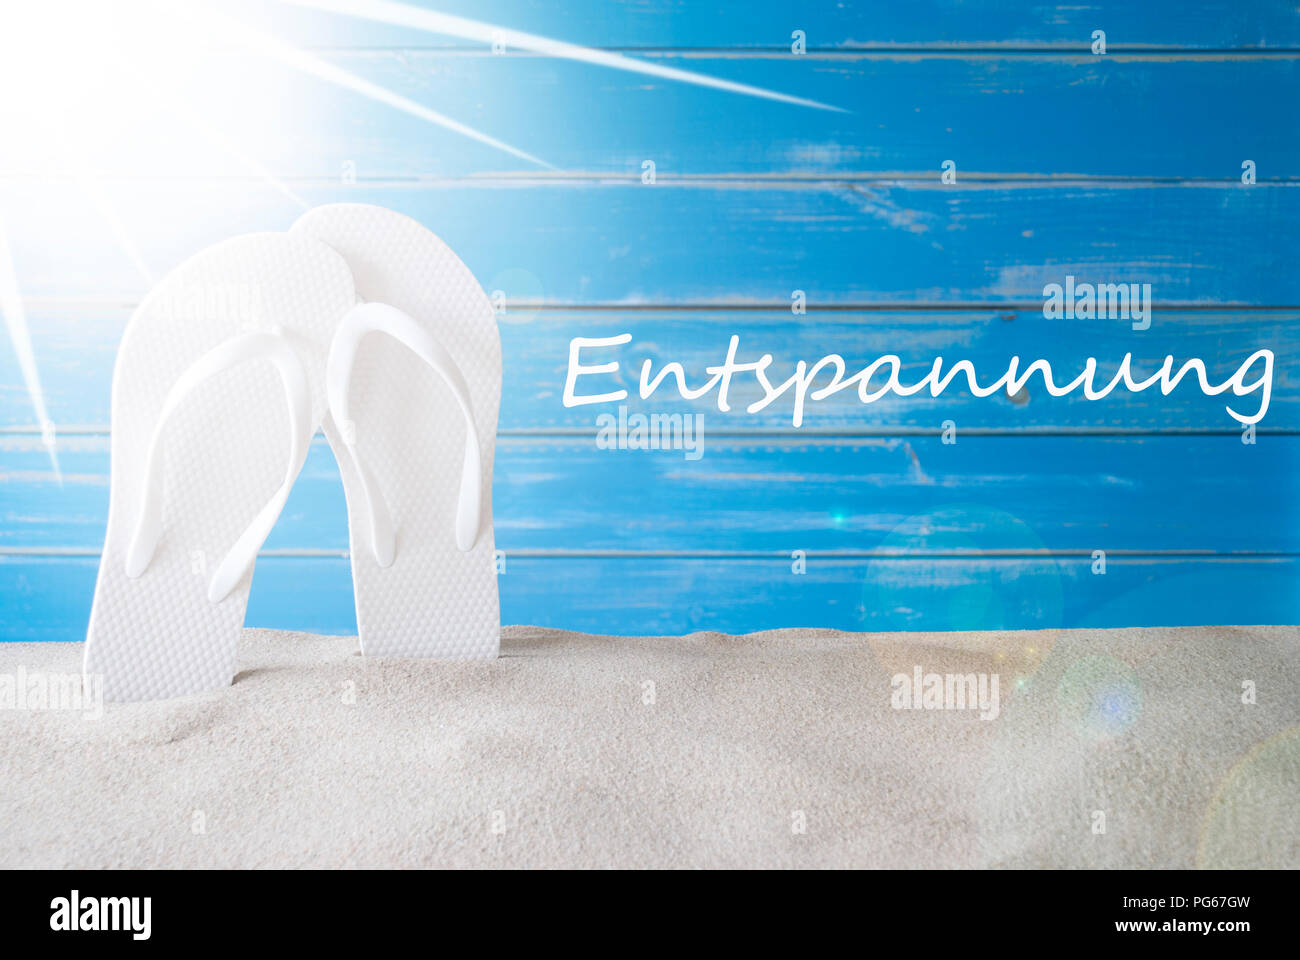 Sunny Summer Blue Background, Entspannung Means Relaxation Stock Photo